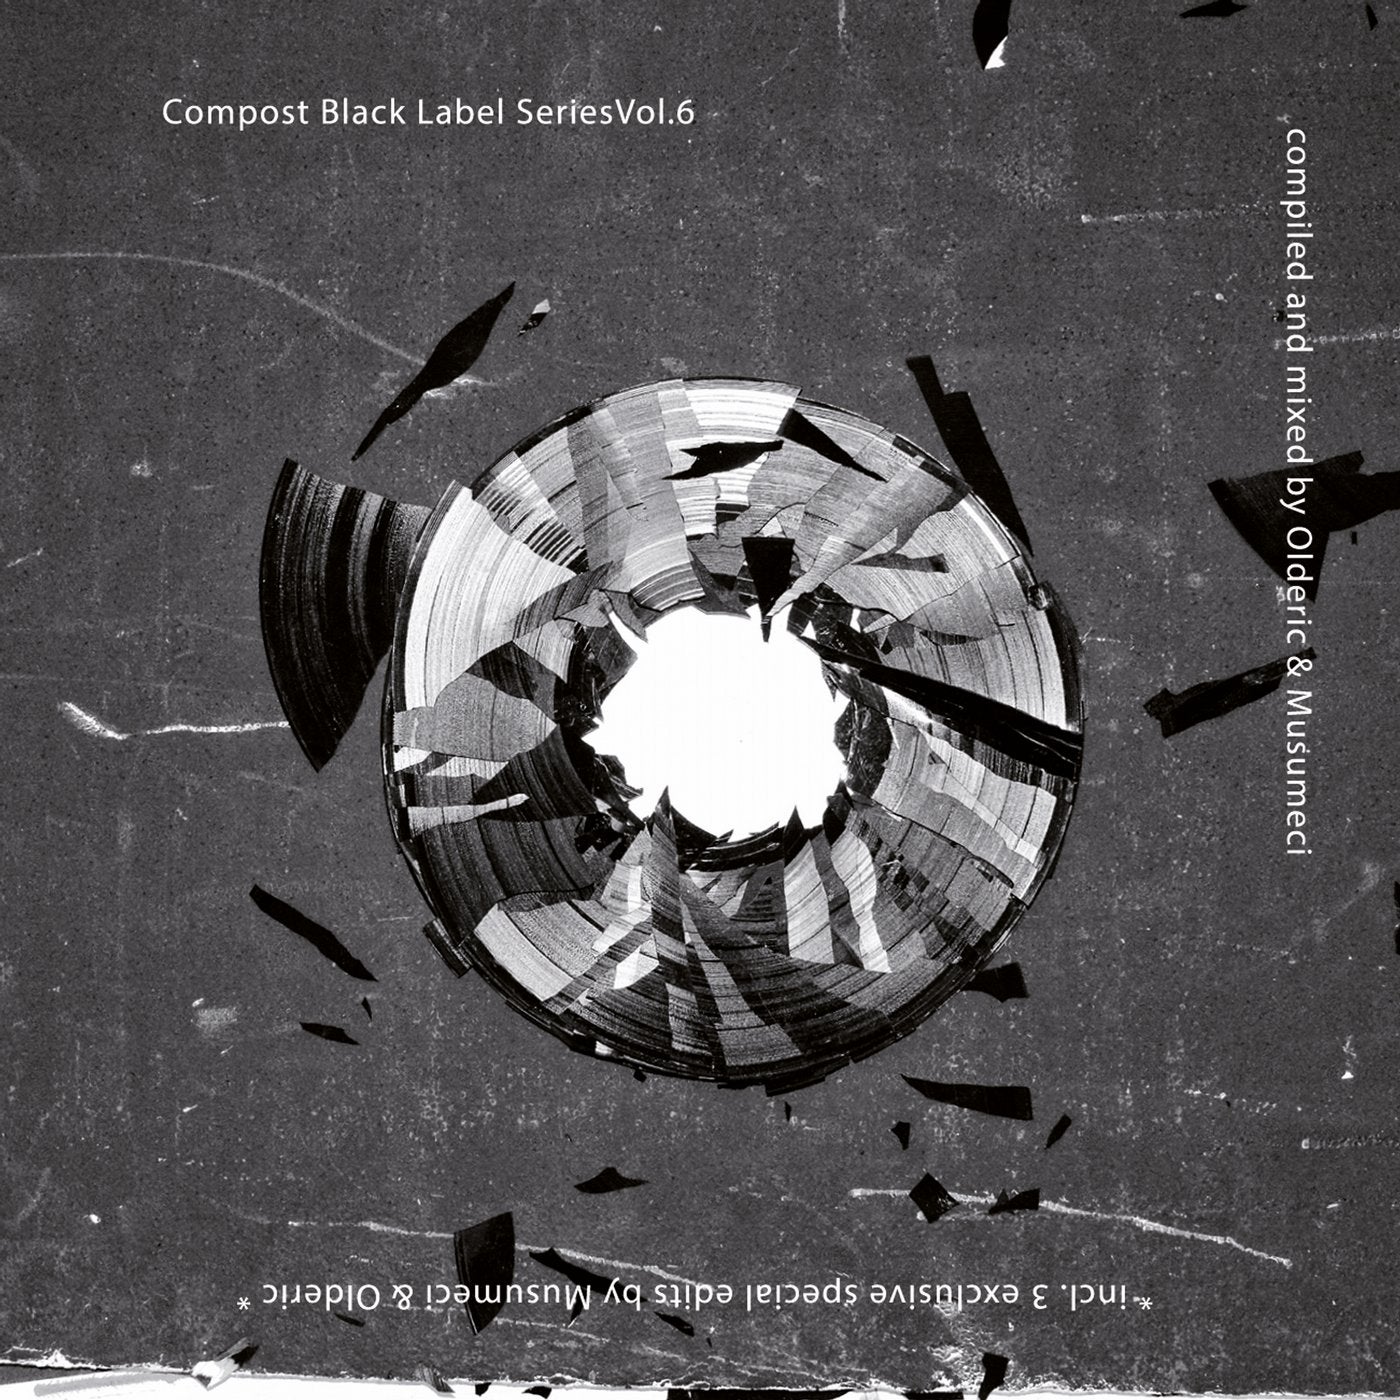 Compost Black Label Series Vol. 6 - Compiled & Mixed By Olderic & Musumeci